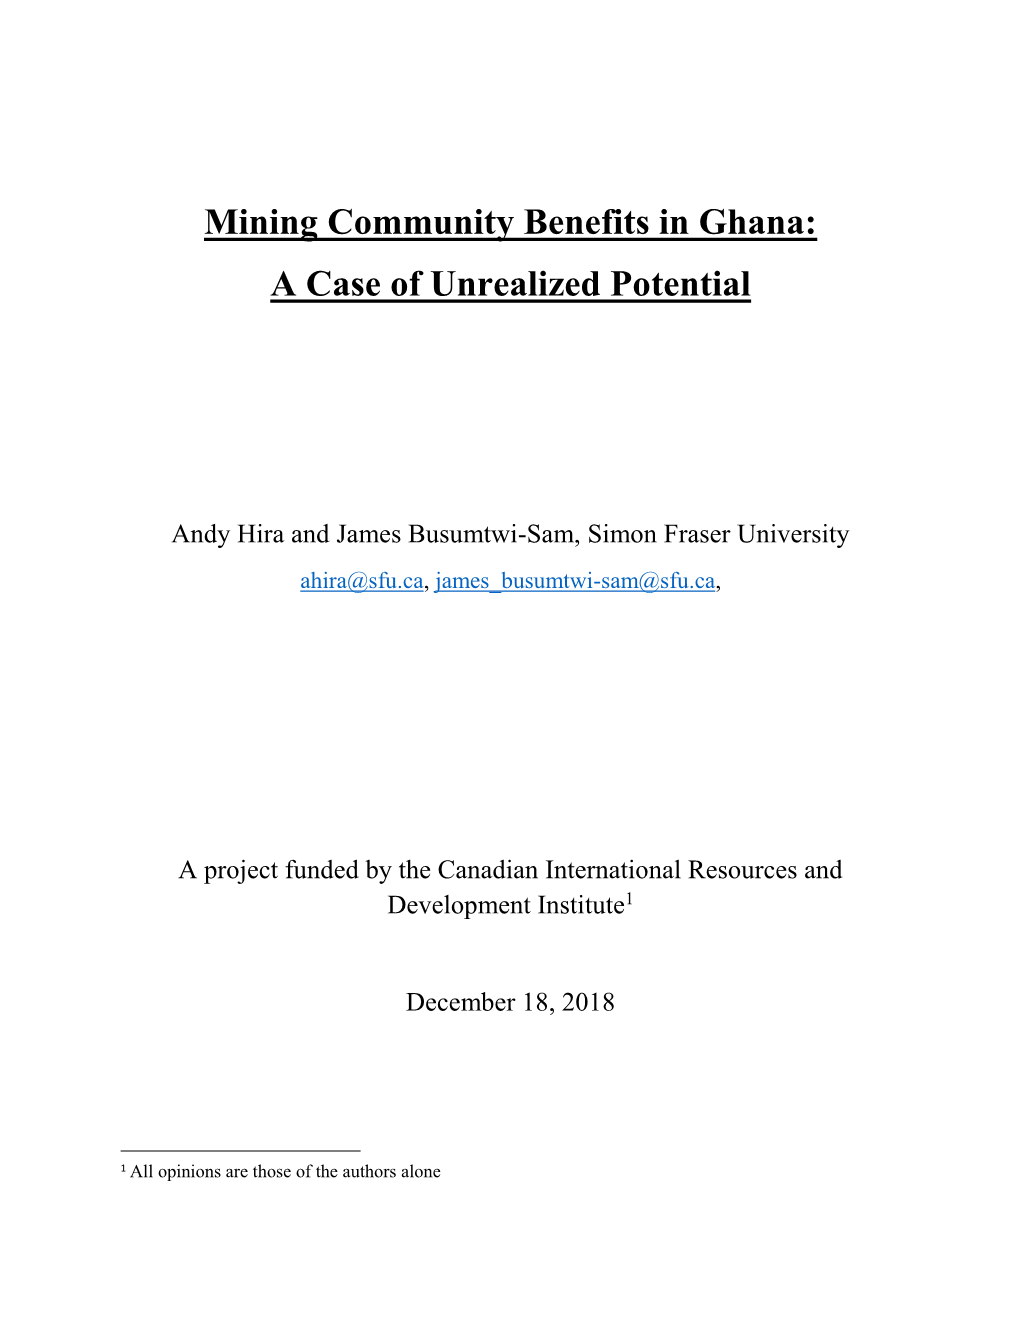 Mining Community Benefits in Ghana: a Case of Unrealized Potential